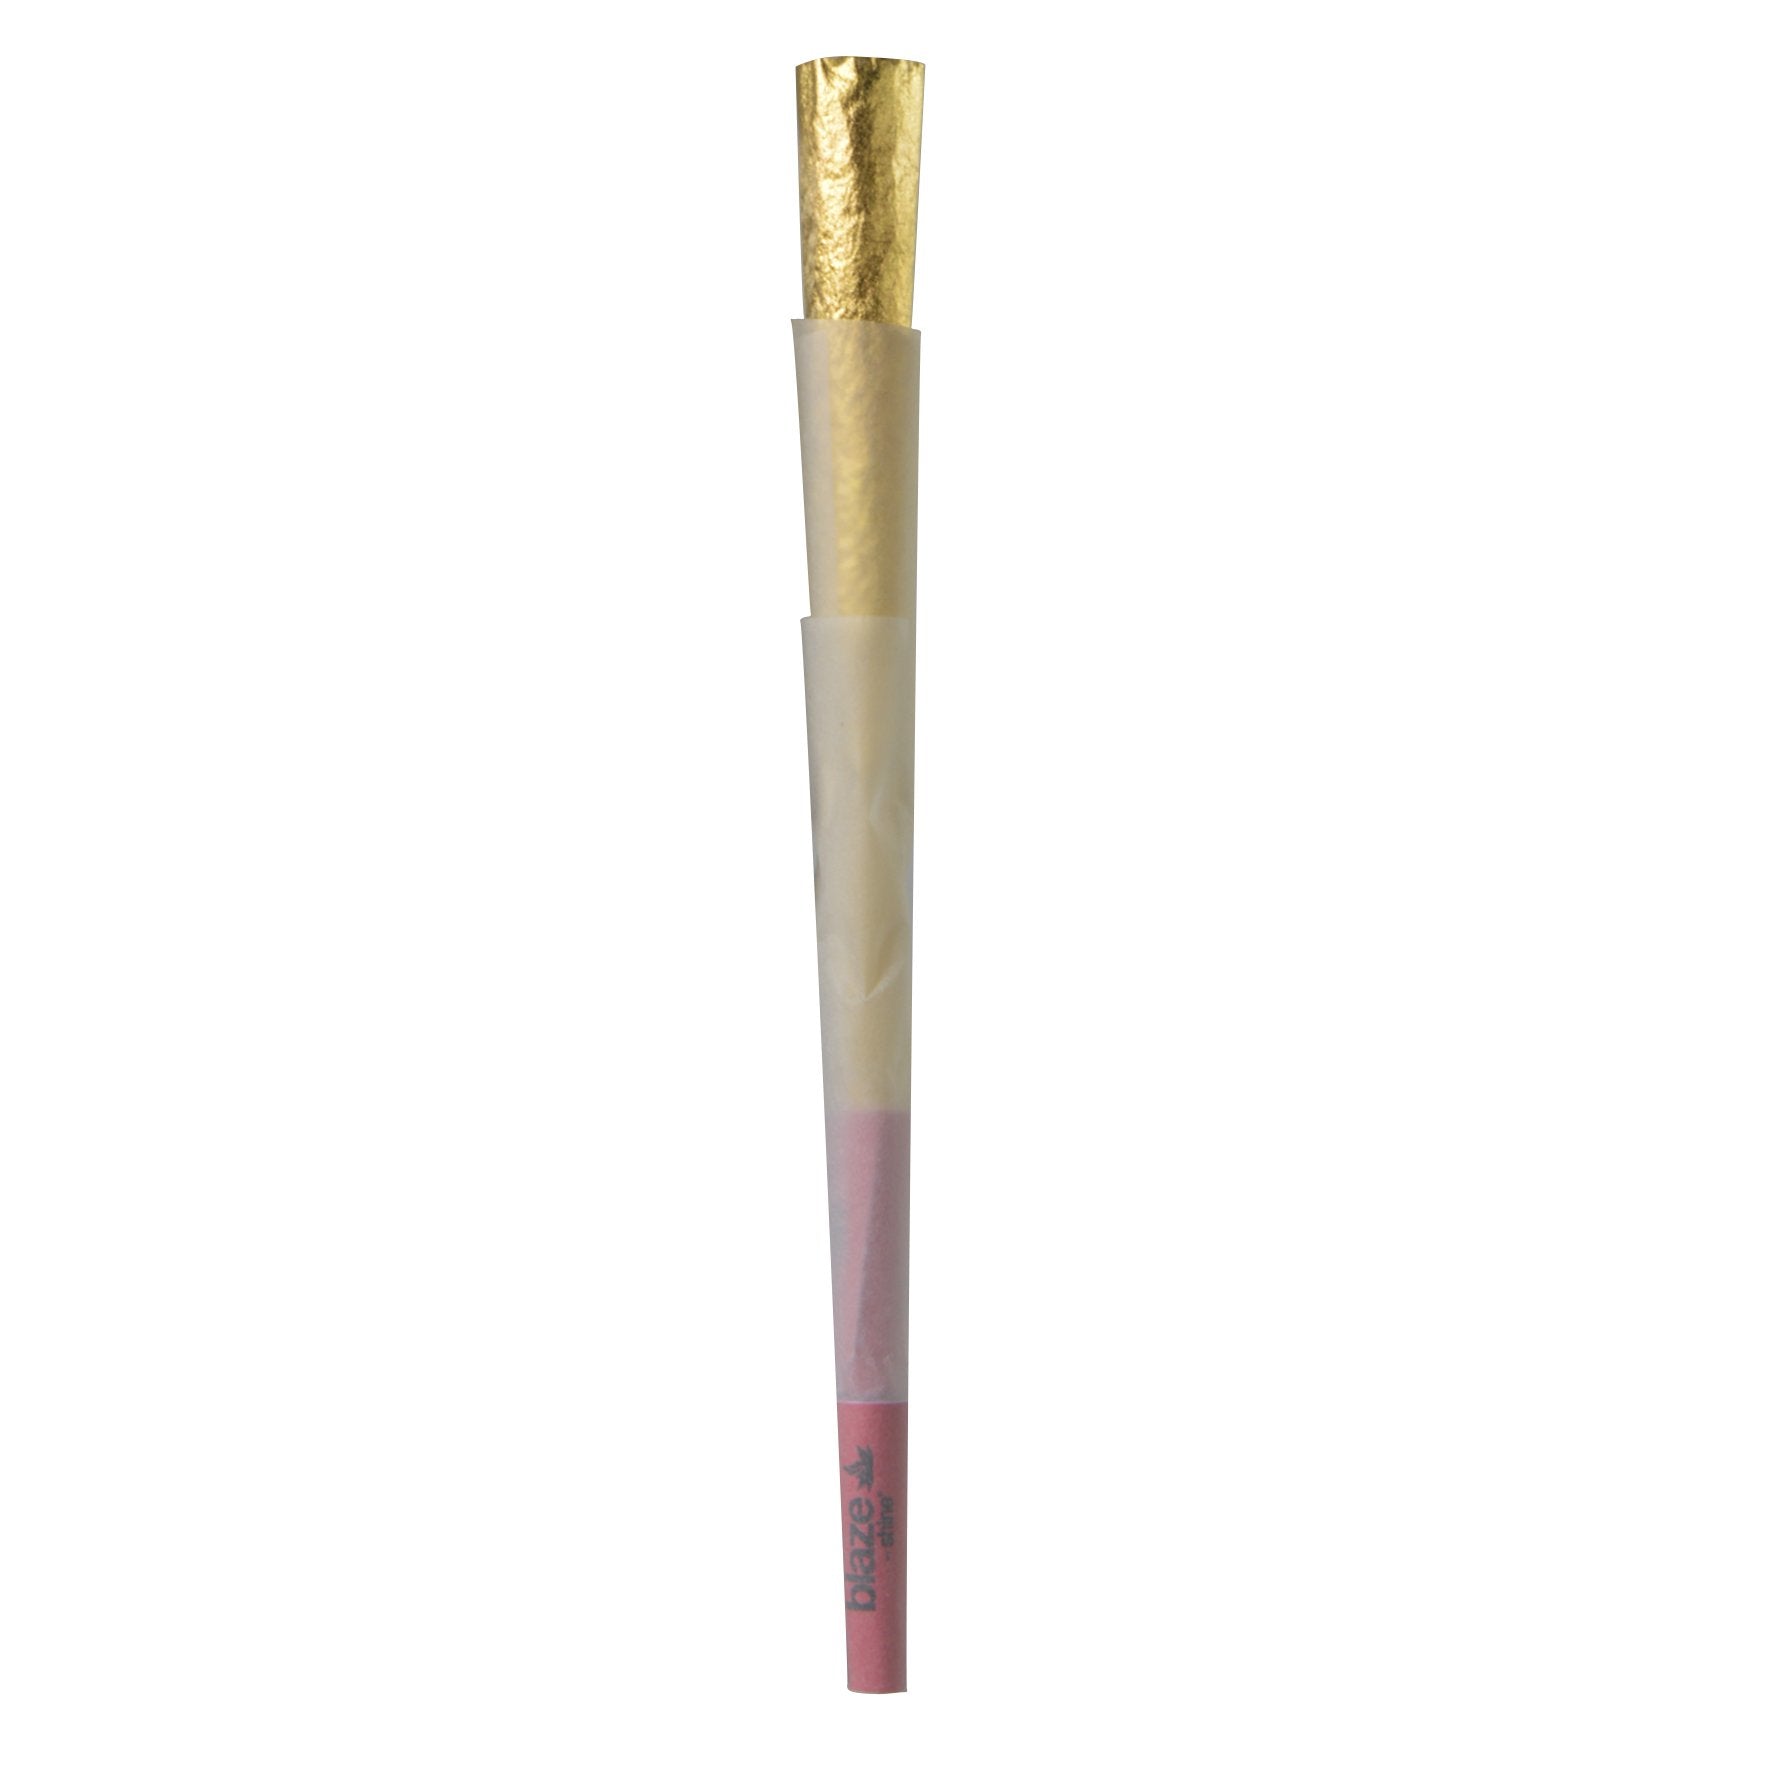 SHINE | 24K Gold Midas King Size Pre-Rolled Cone | 98mm - Edible Gold - 1 Count - 2